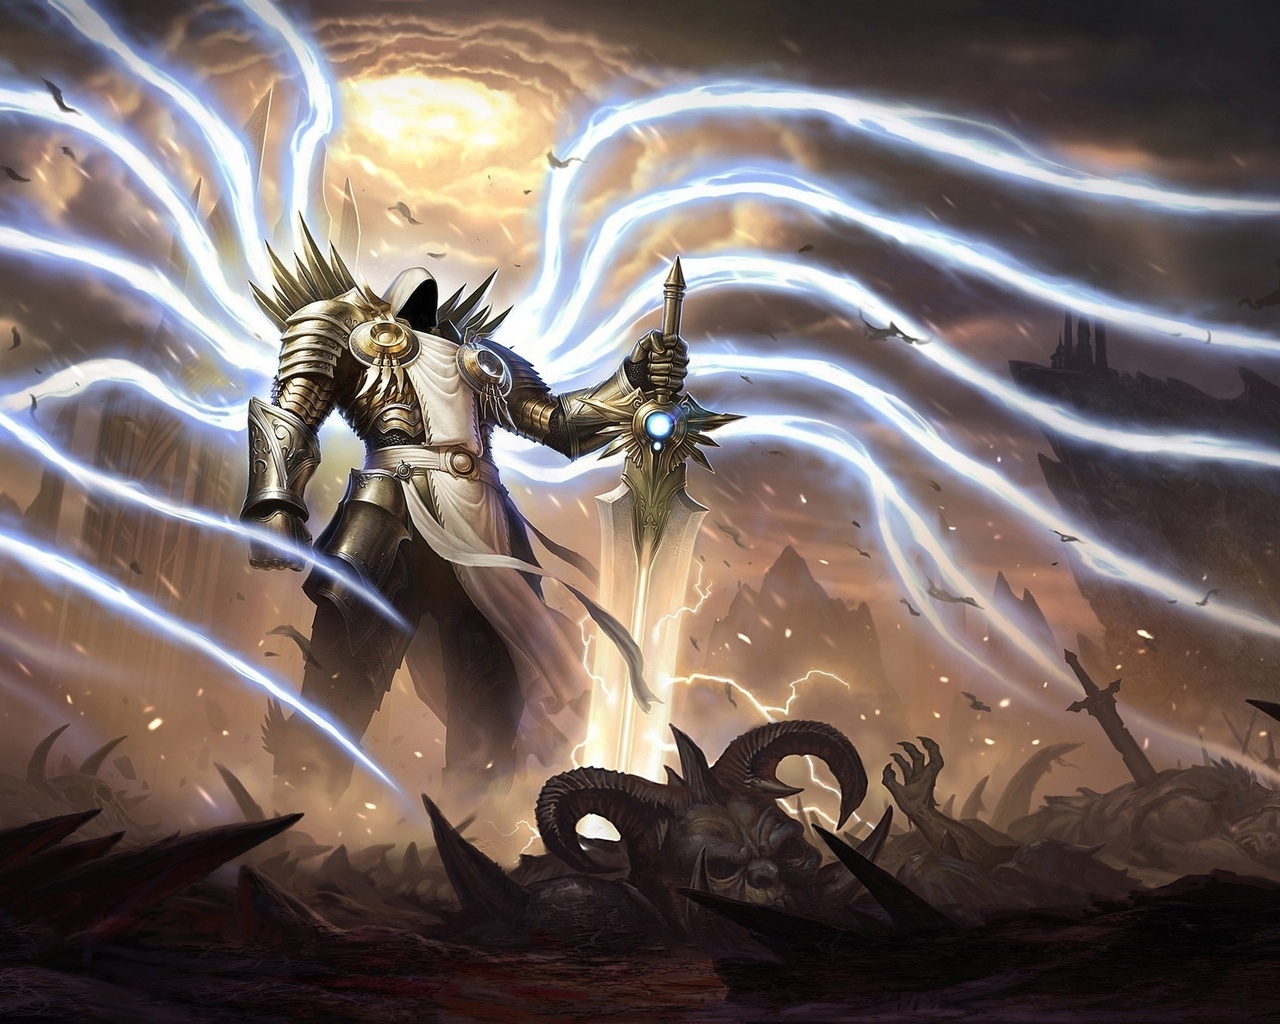 Diablo 3 Reaper of Souls Game for 1280 x 1024 resolution